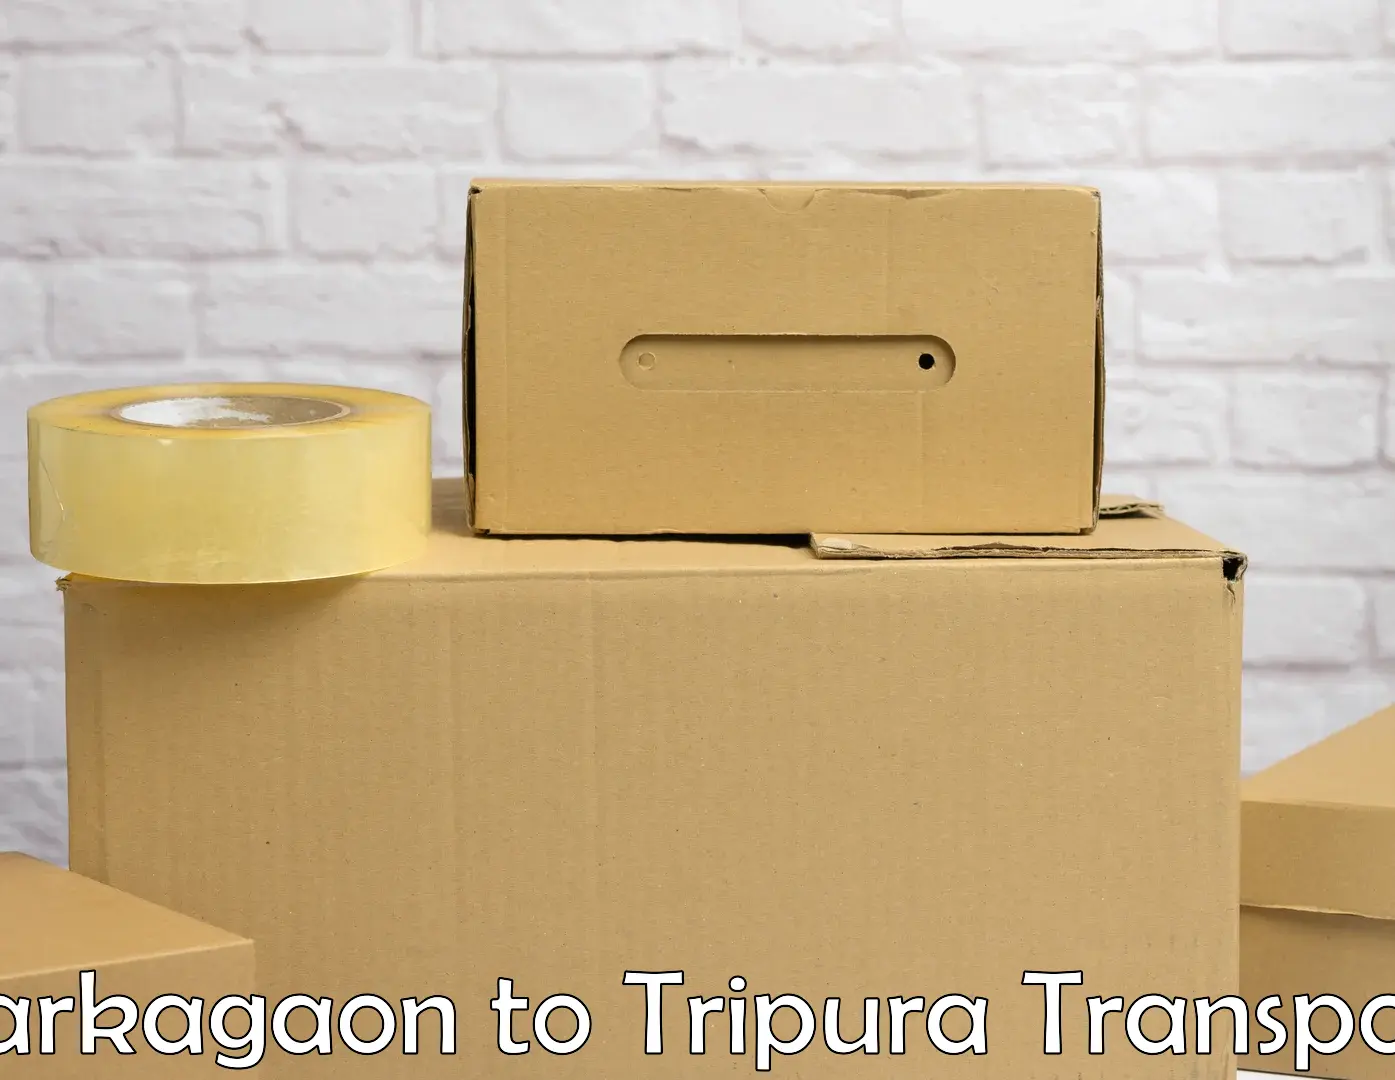 Best transport services in India in Barkagaon to Udaipur Tripura